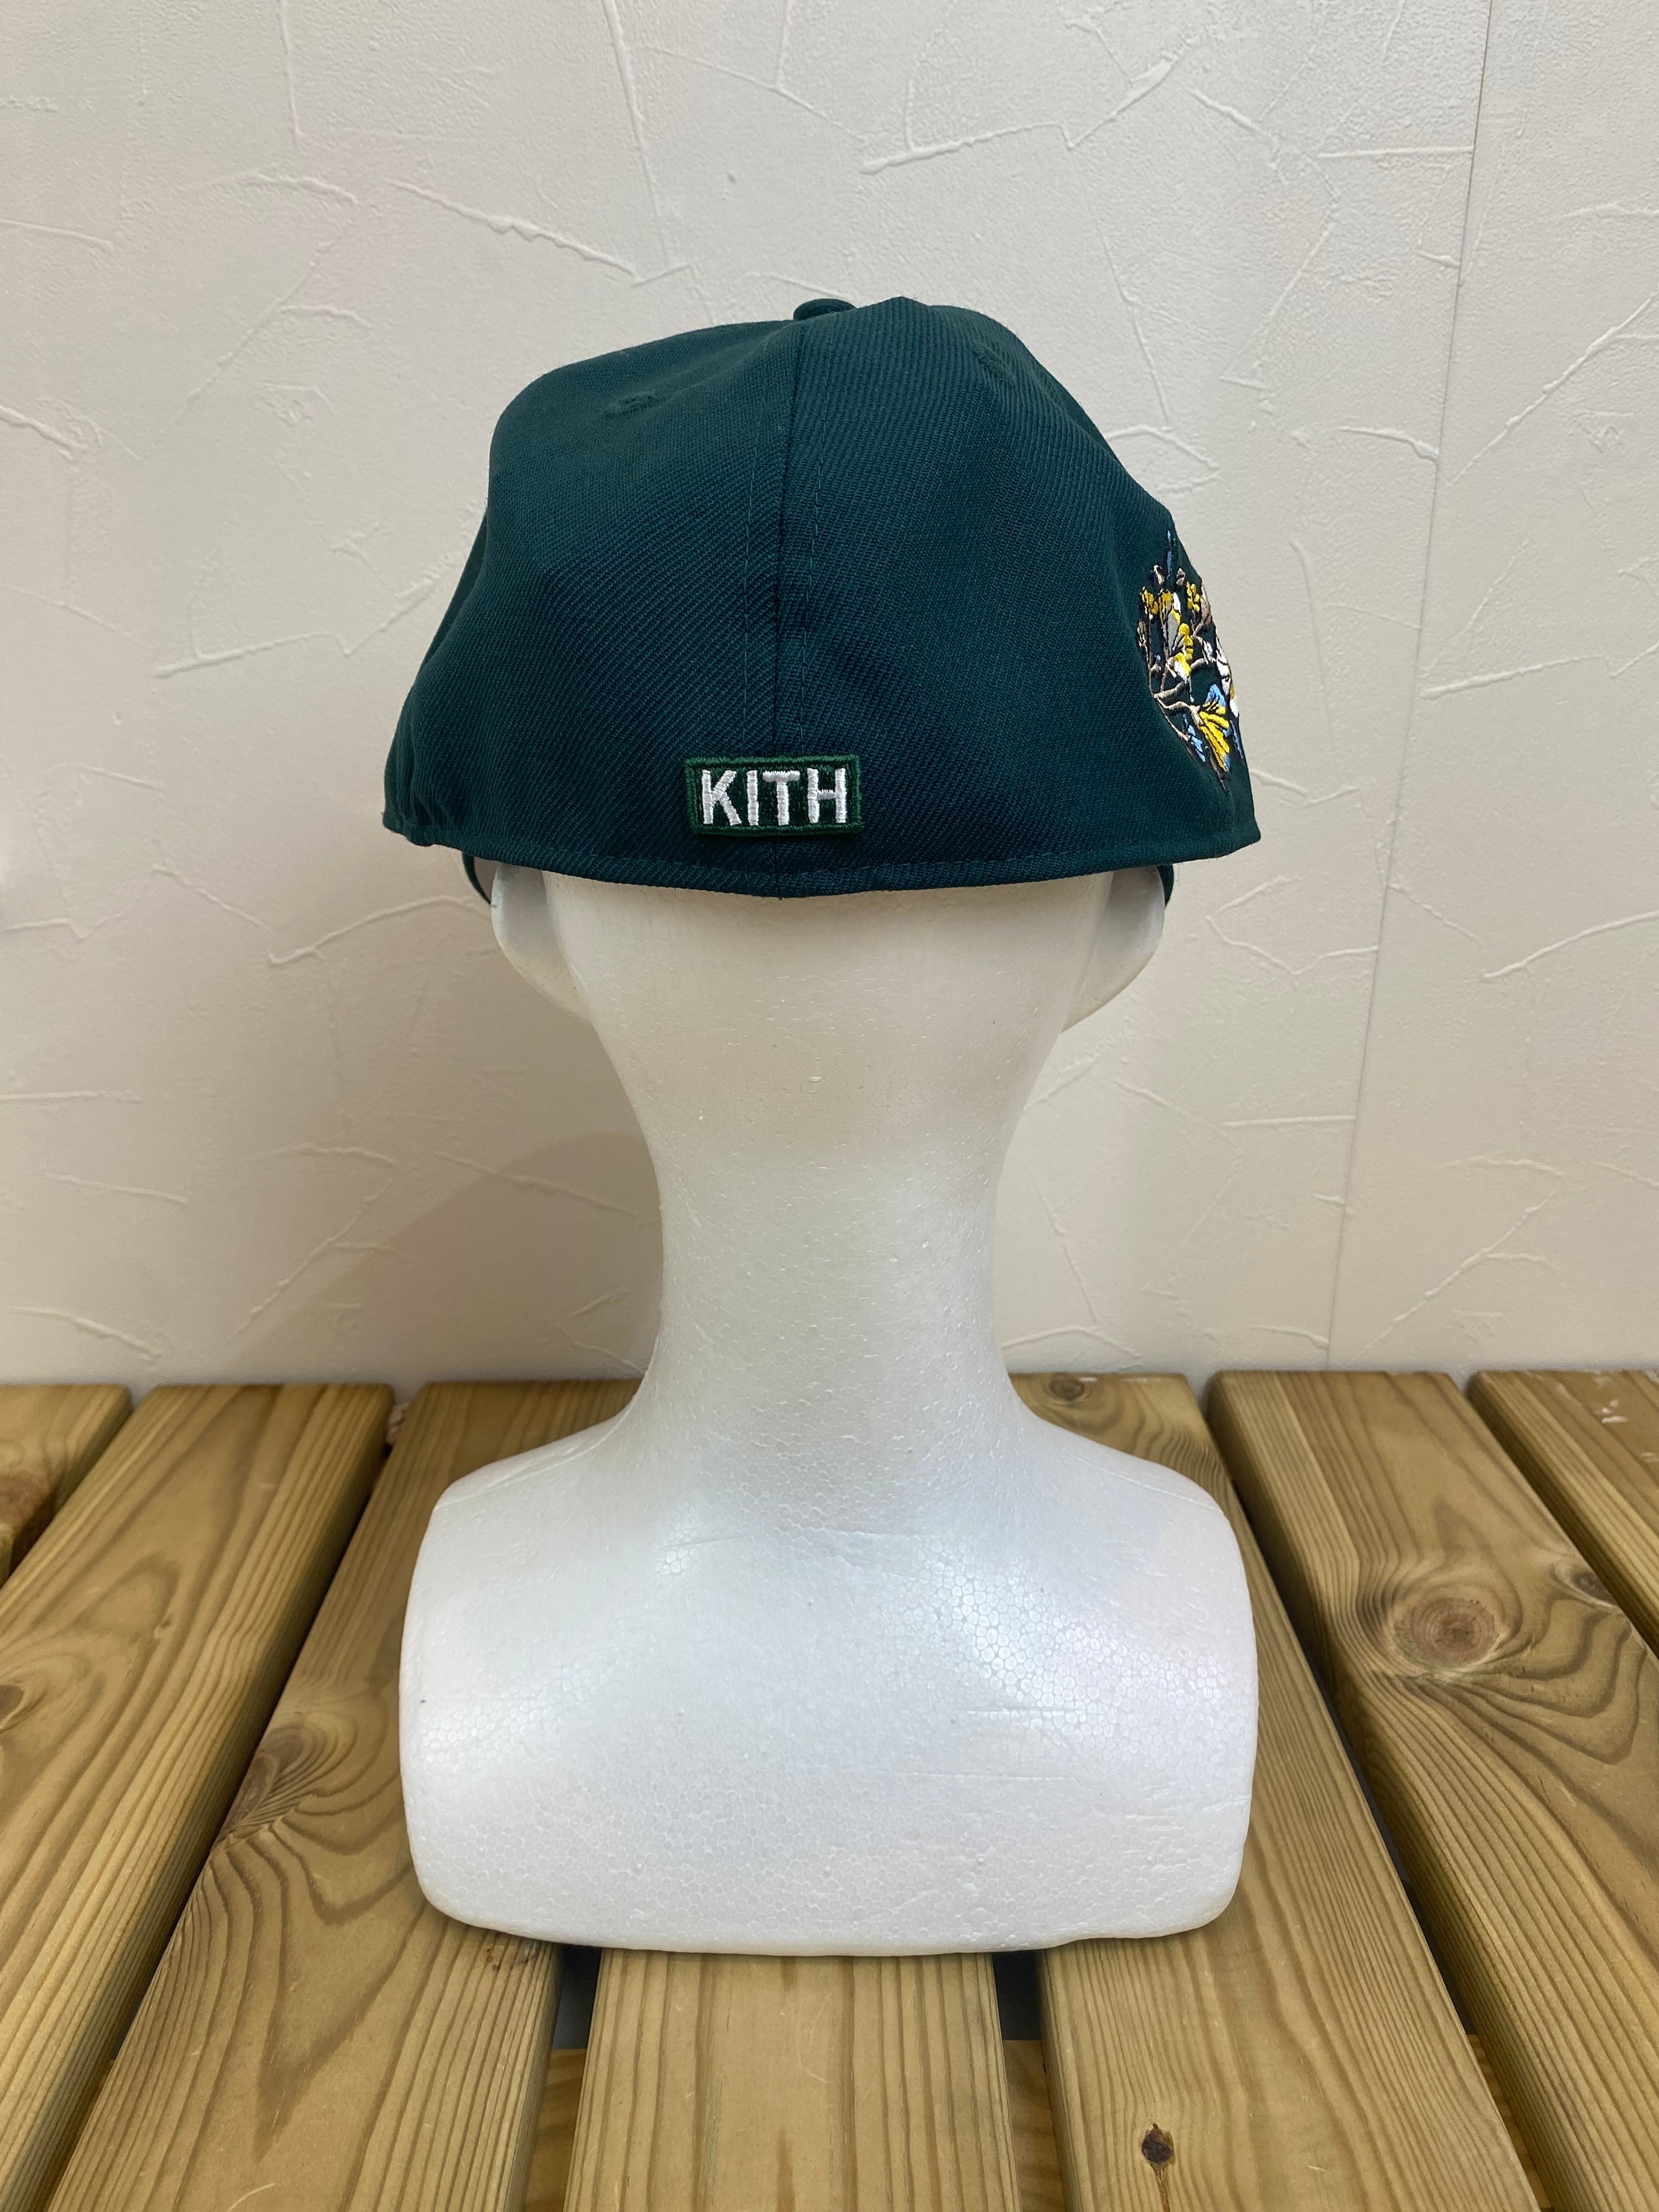 KITH × NEW ERA NEW YORK YANKEES FLORAL LOW CROWN FITTED CAP 7 3/8 ...